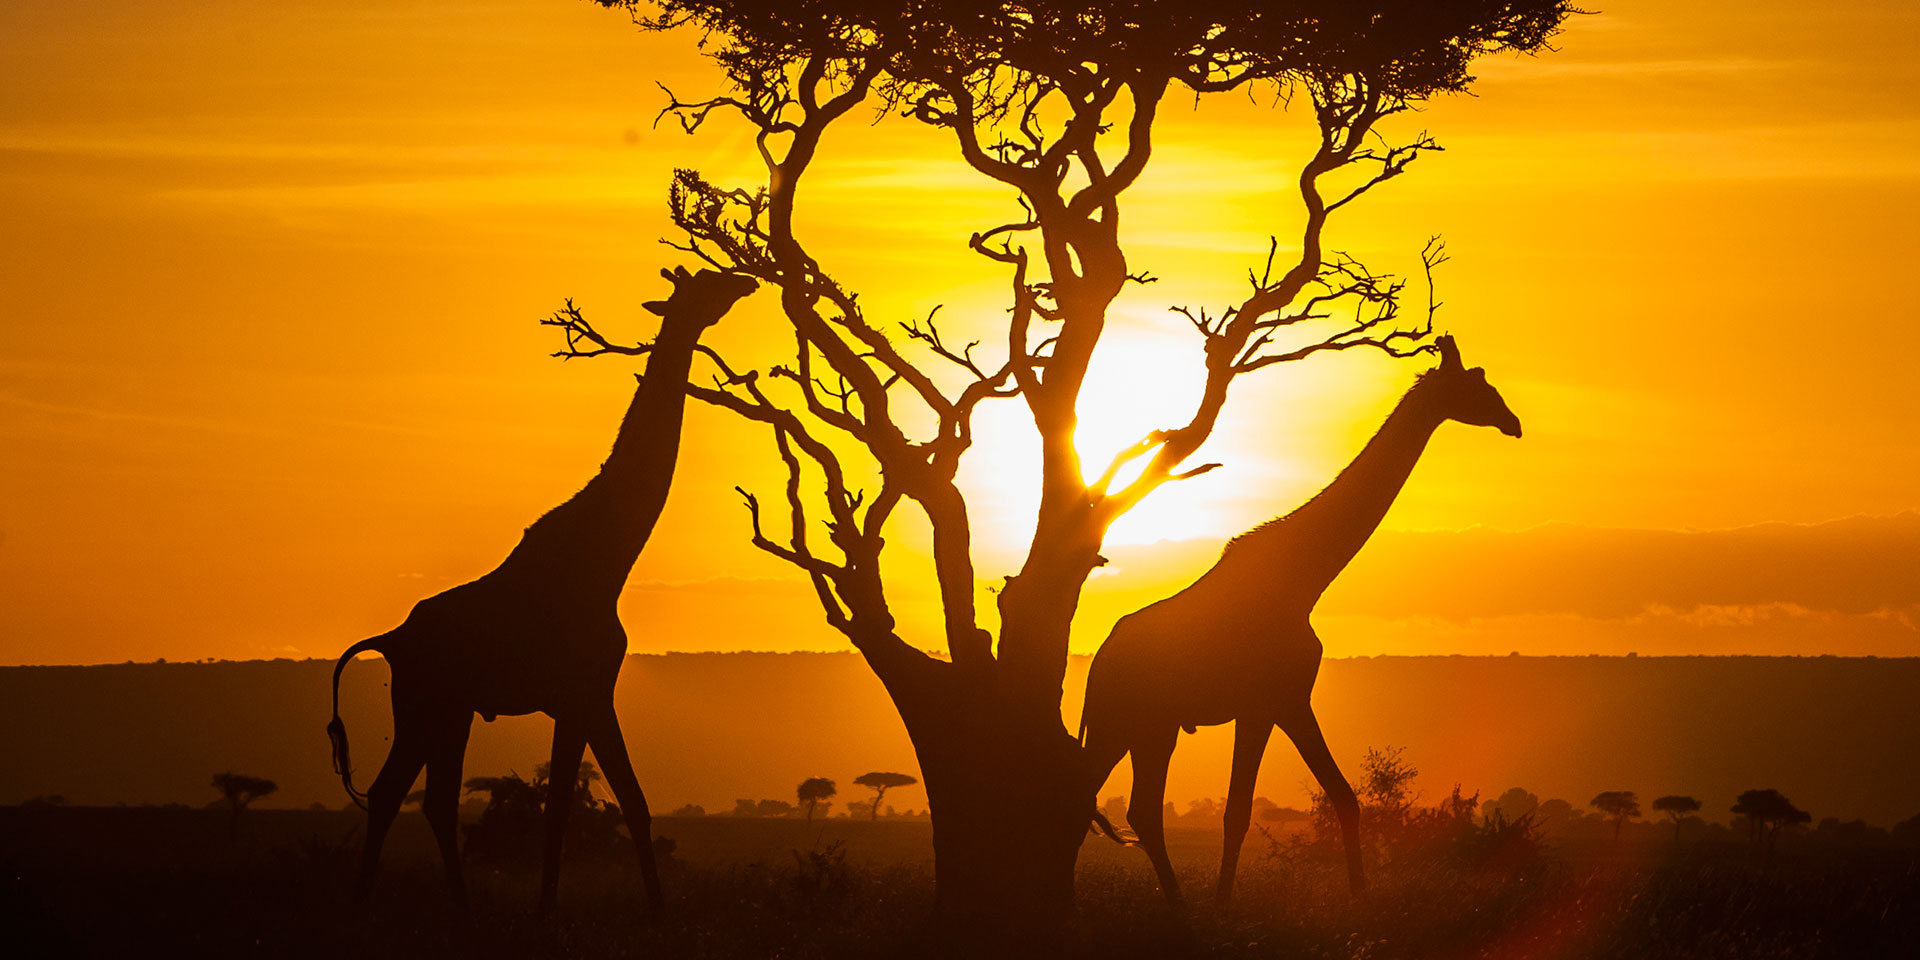 7 little-known beautiful places you must visit in KenyaA7 little-known beautiful places you must visit in Kenya